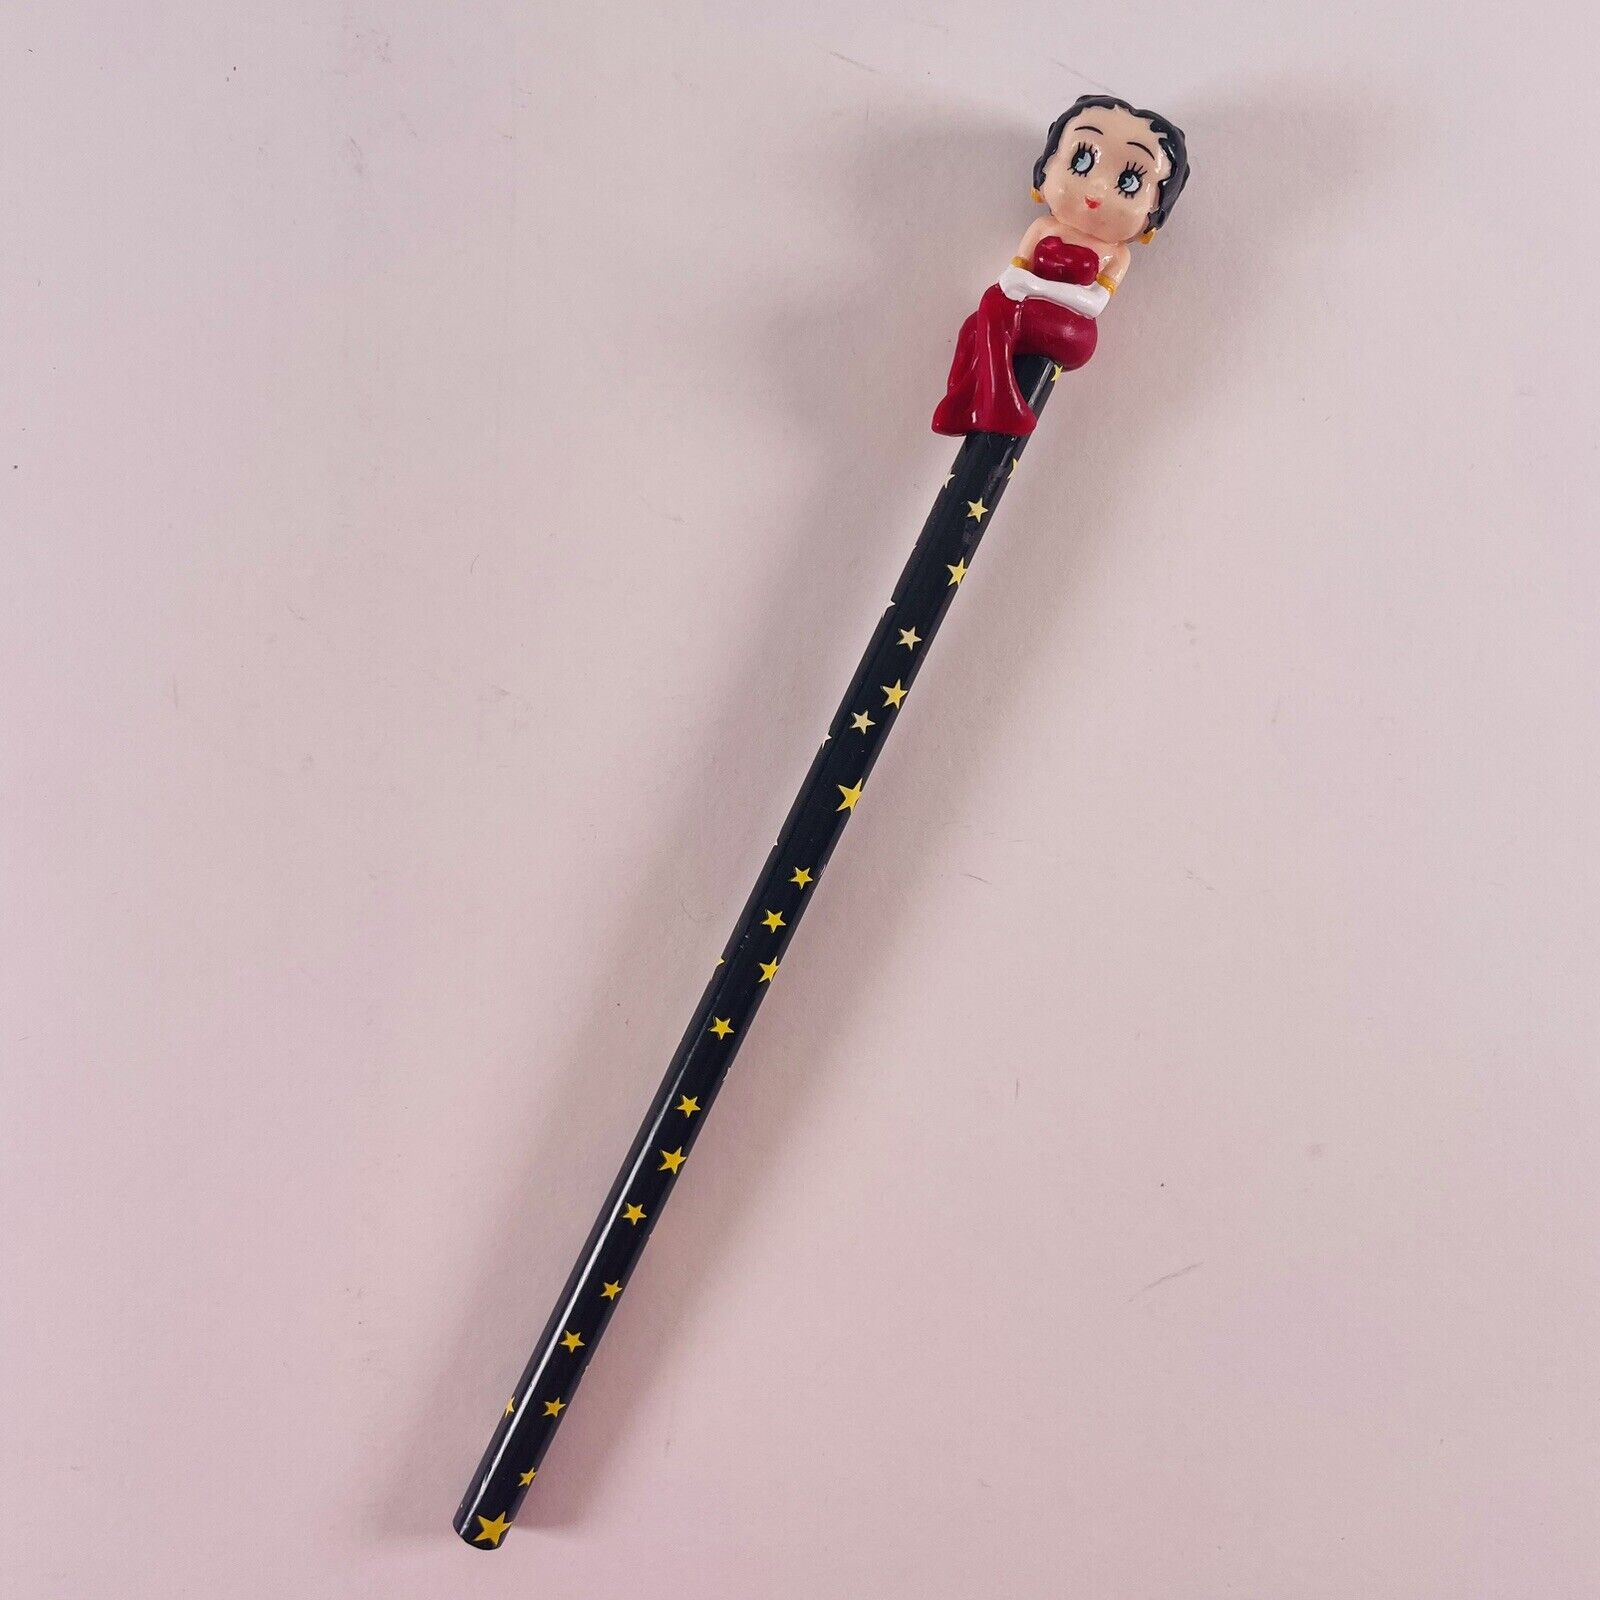 Vintage 1990 Betty Boop Star Pencil w/Red Dress Topper Figurine Never Used